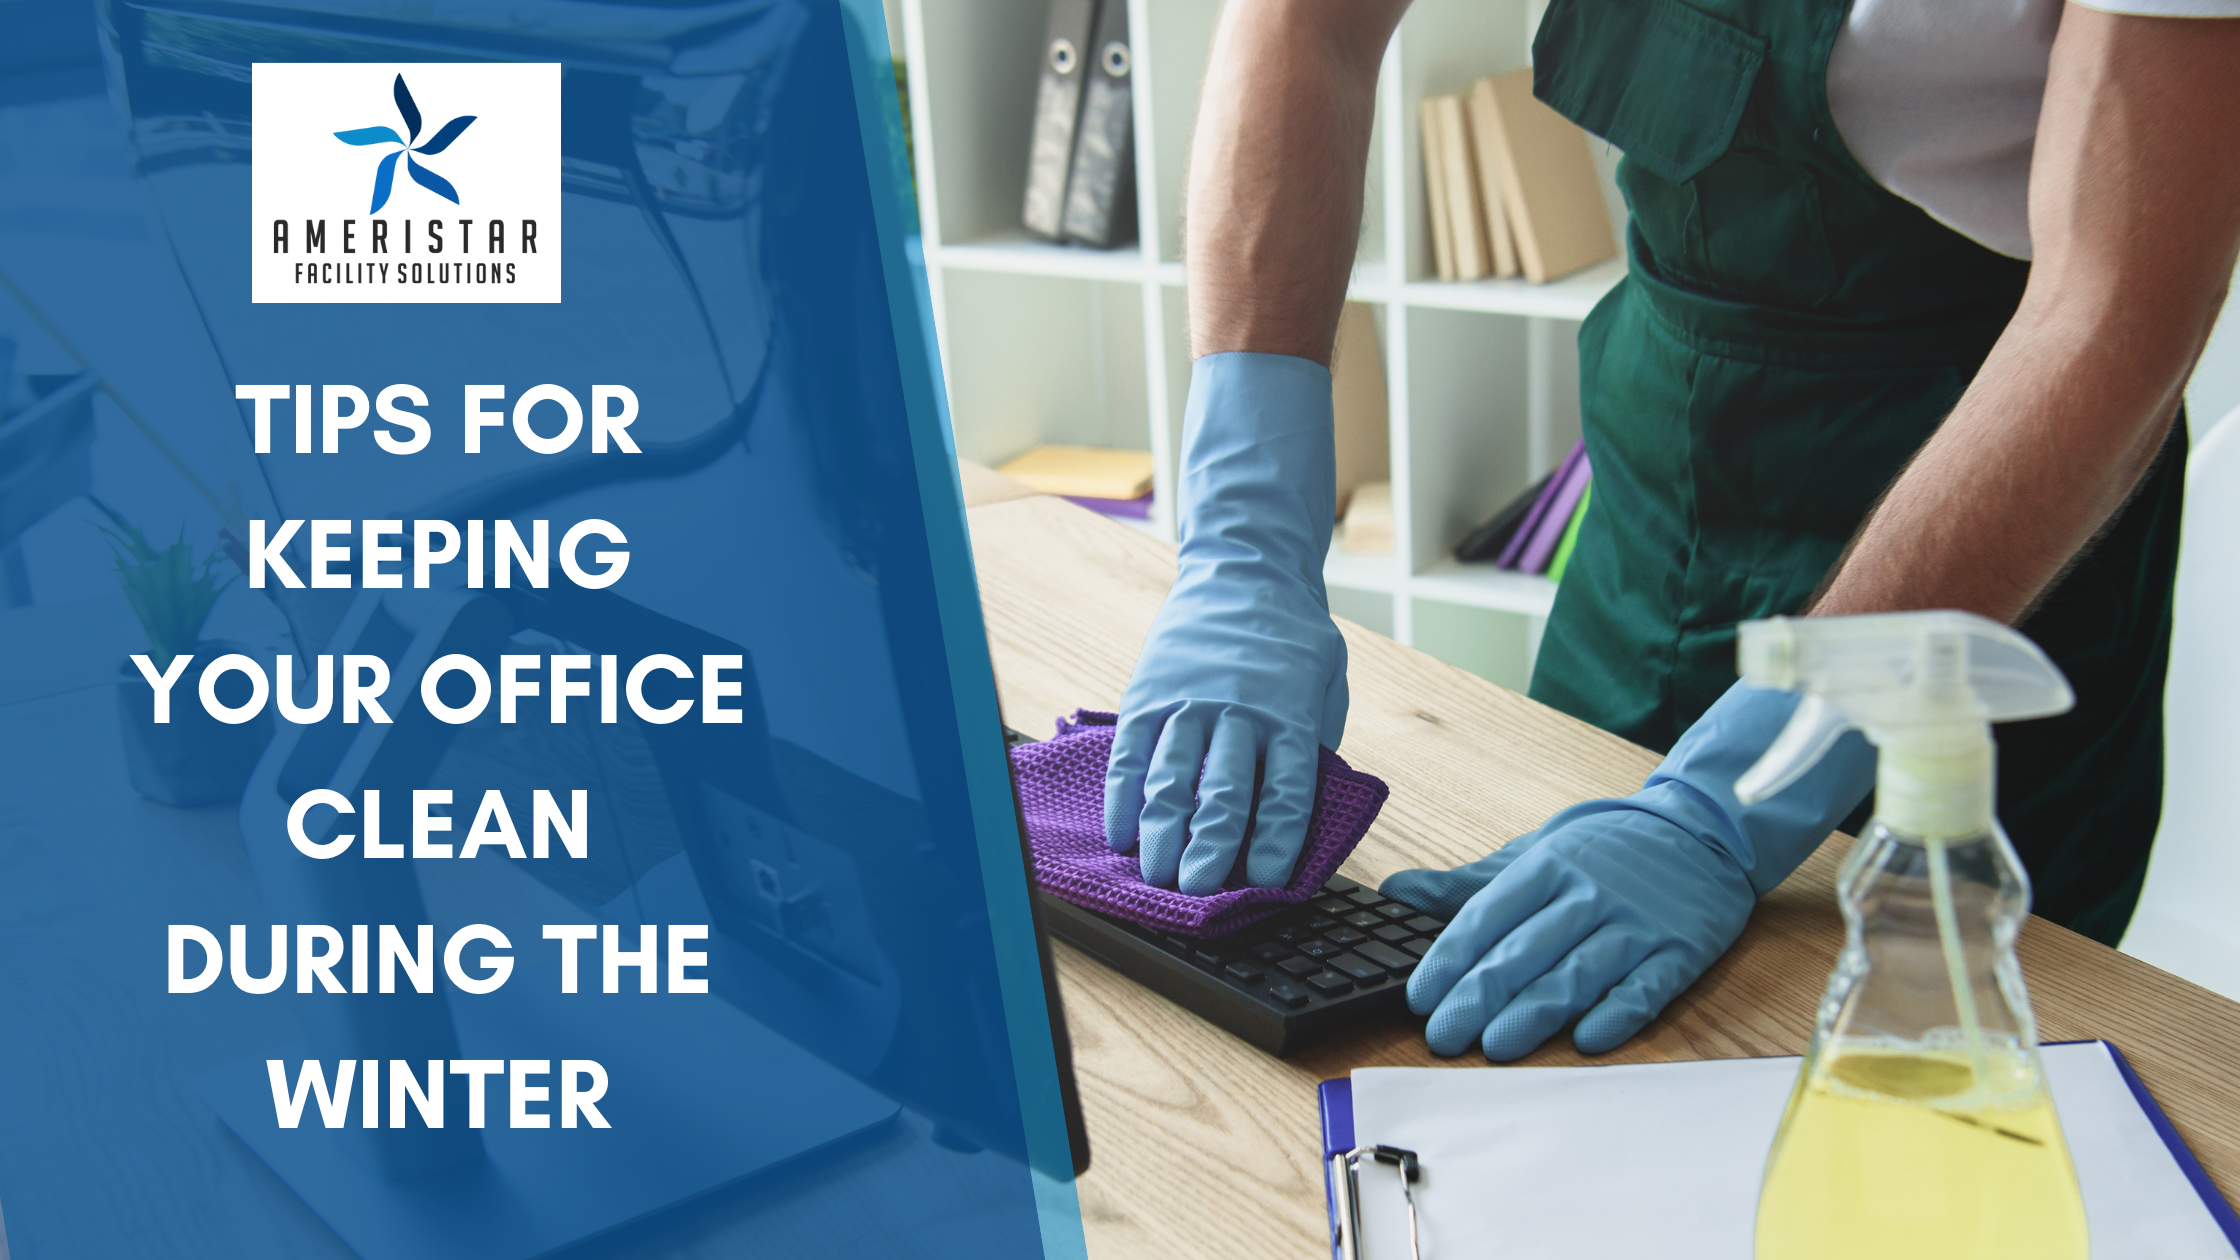 Tips for Keeping Your Office Clean During the Winter